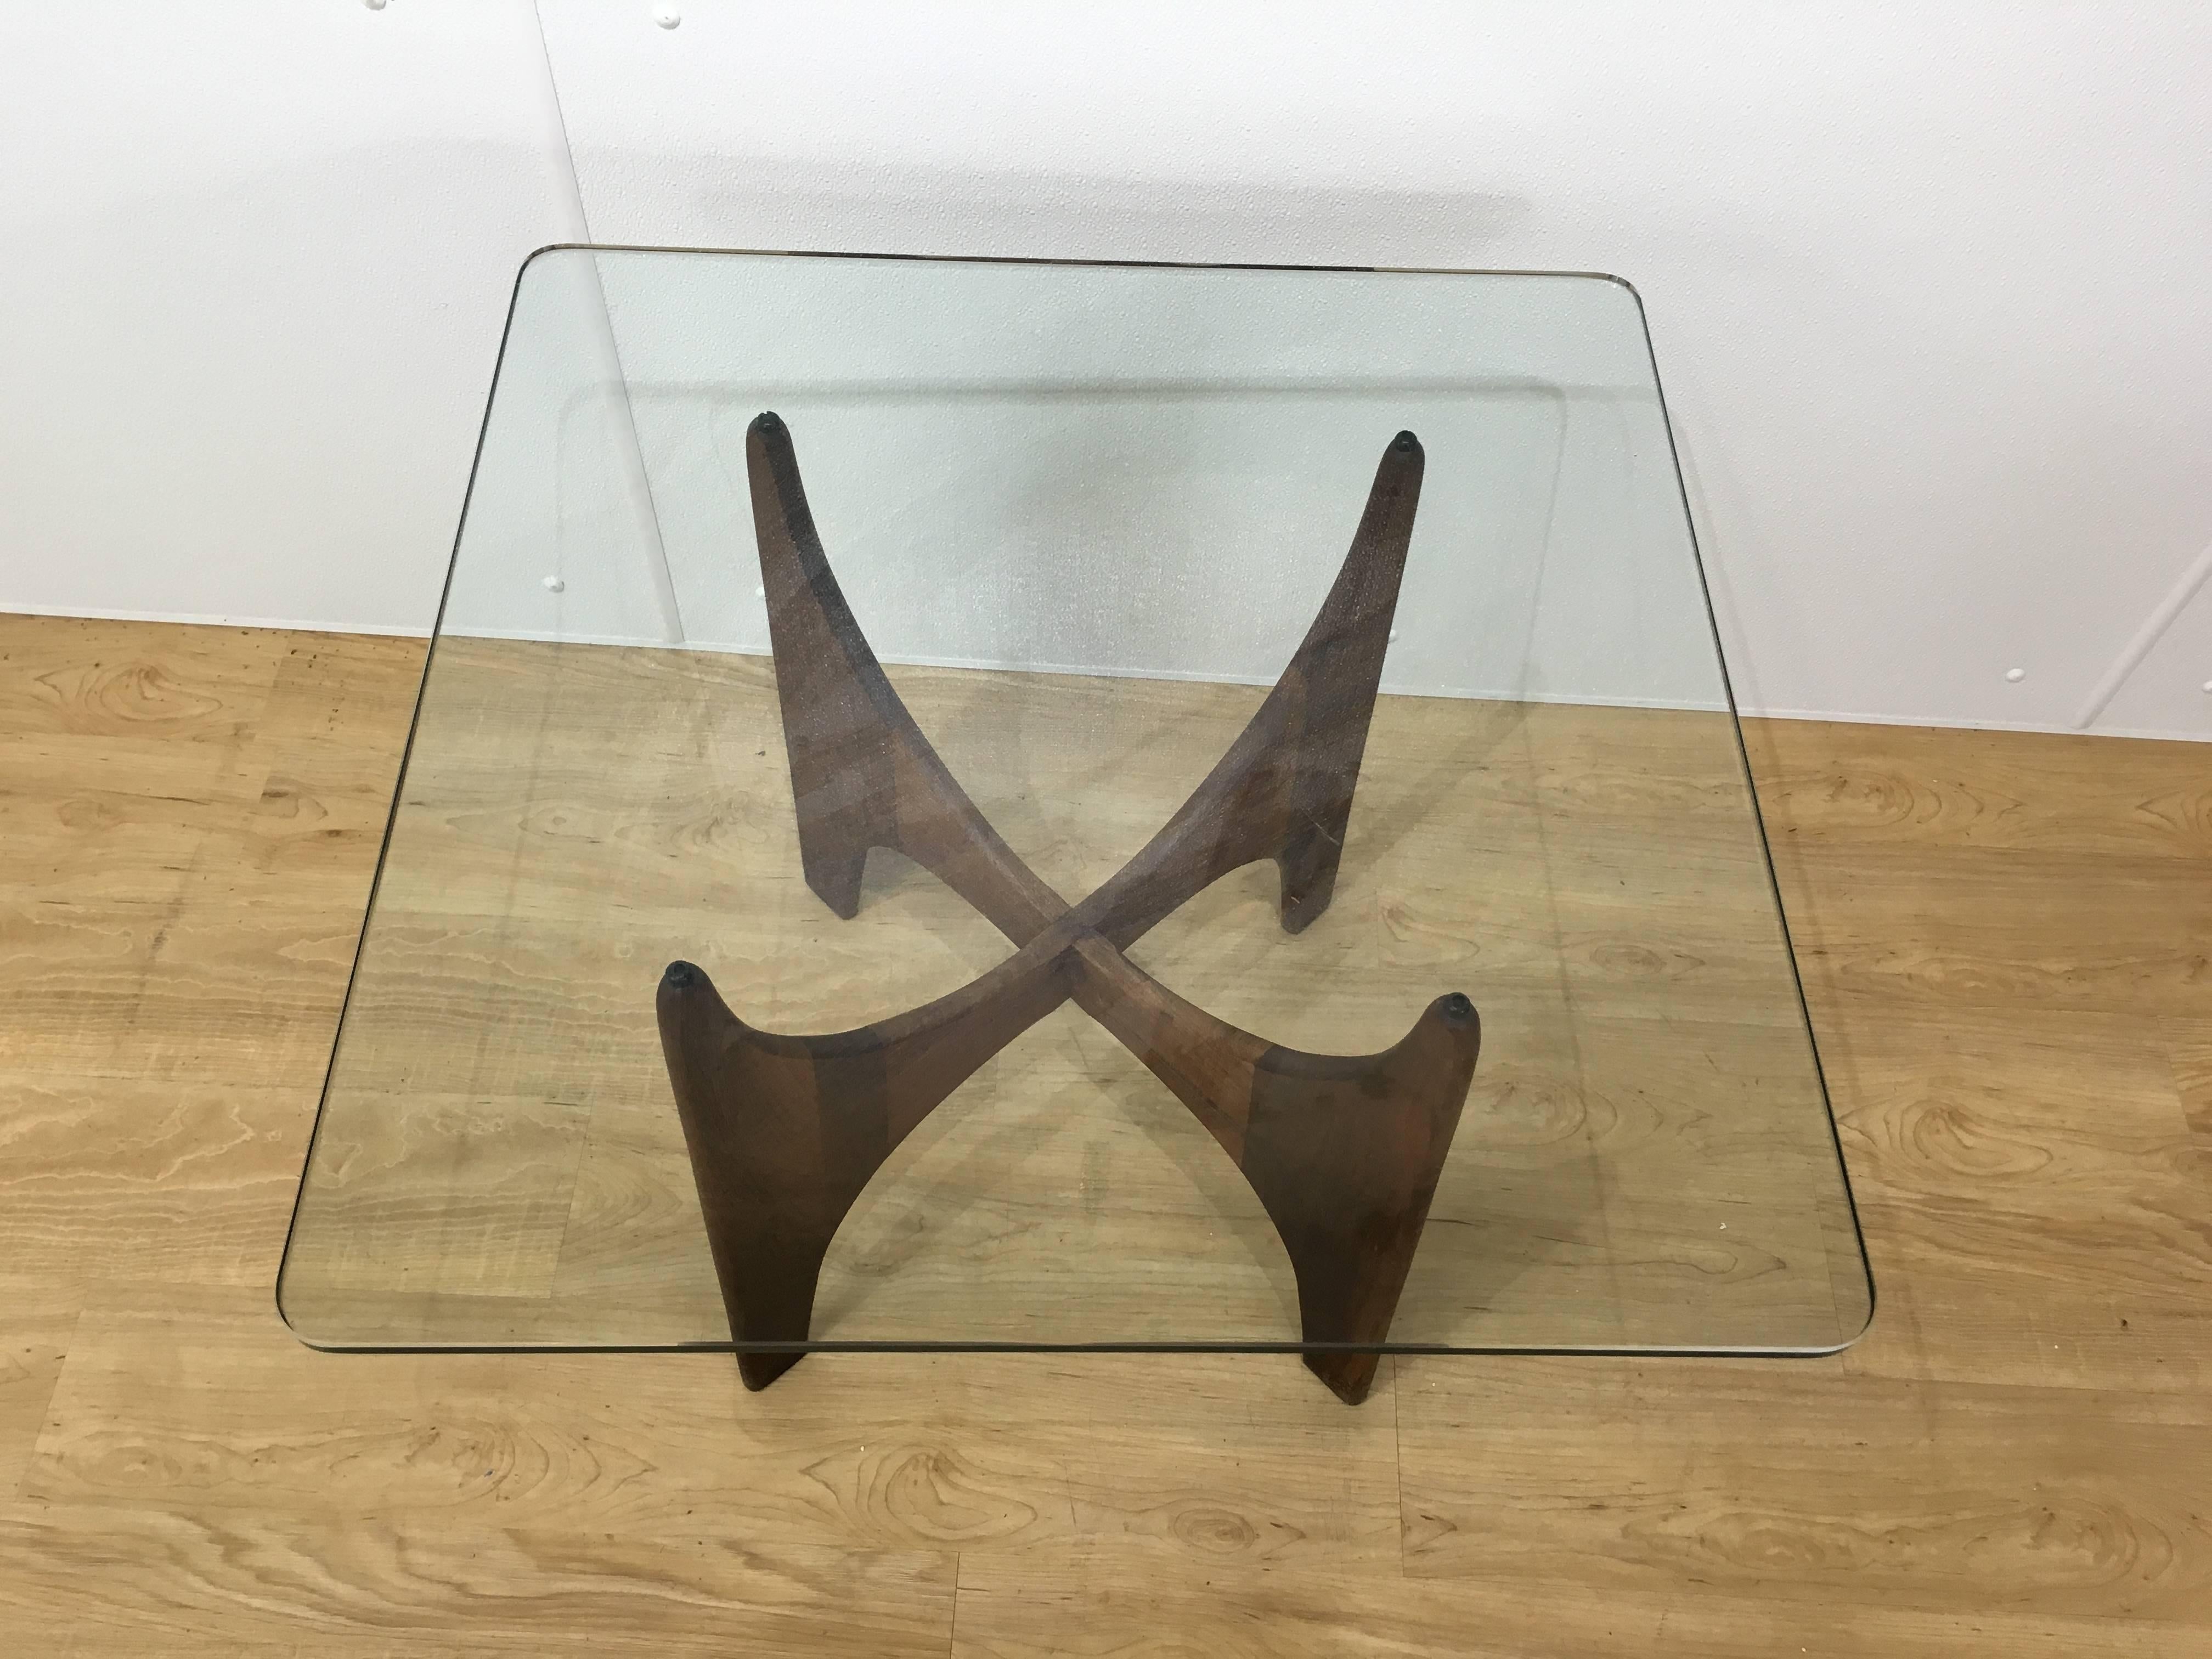 Sculptural walnut occasional table by Adrian Pearsall for Craft Associates. Classic design and scale make this piece versatile. 

Measurements of base without glass: 15.75